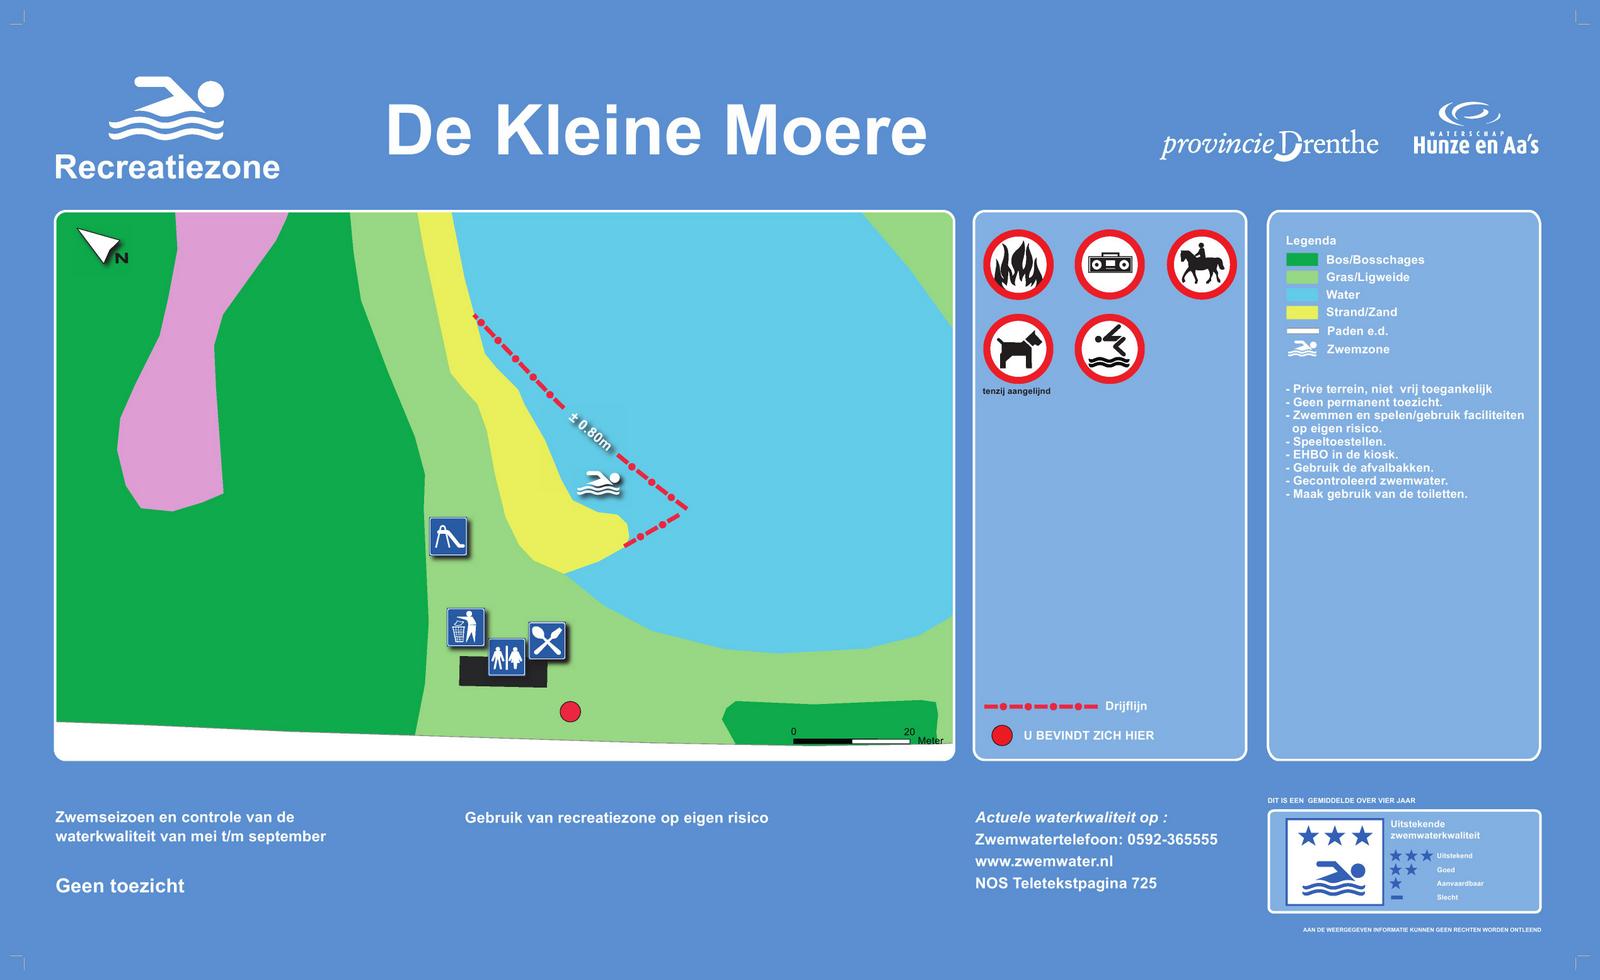 The information board at the swimming location De Kleine Moere